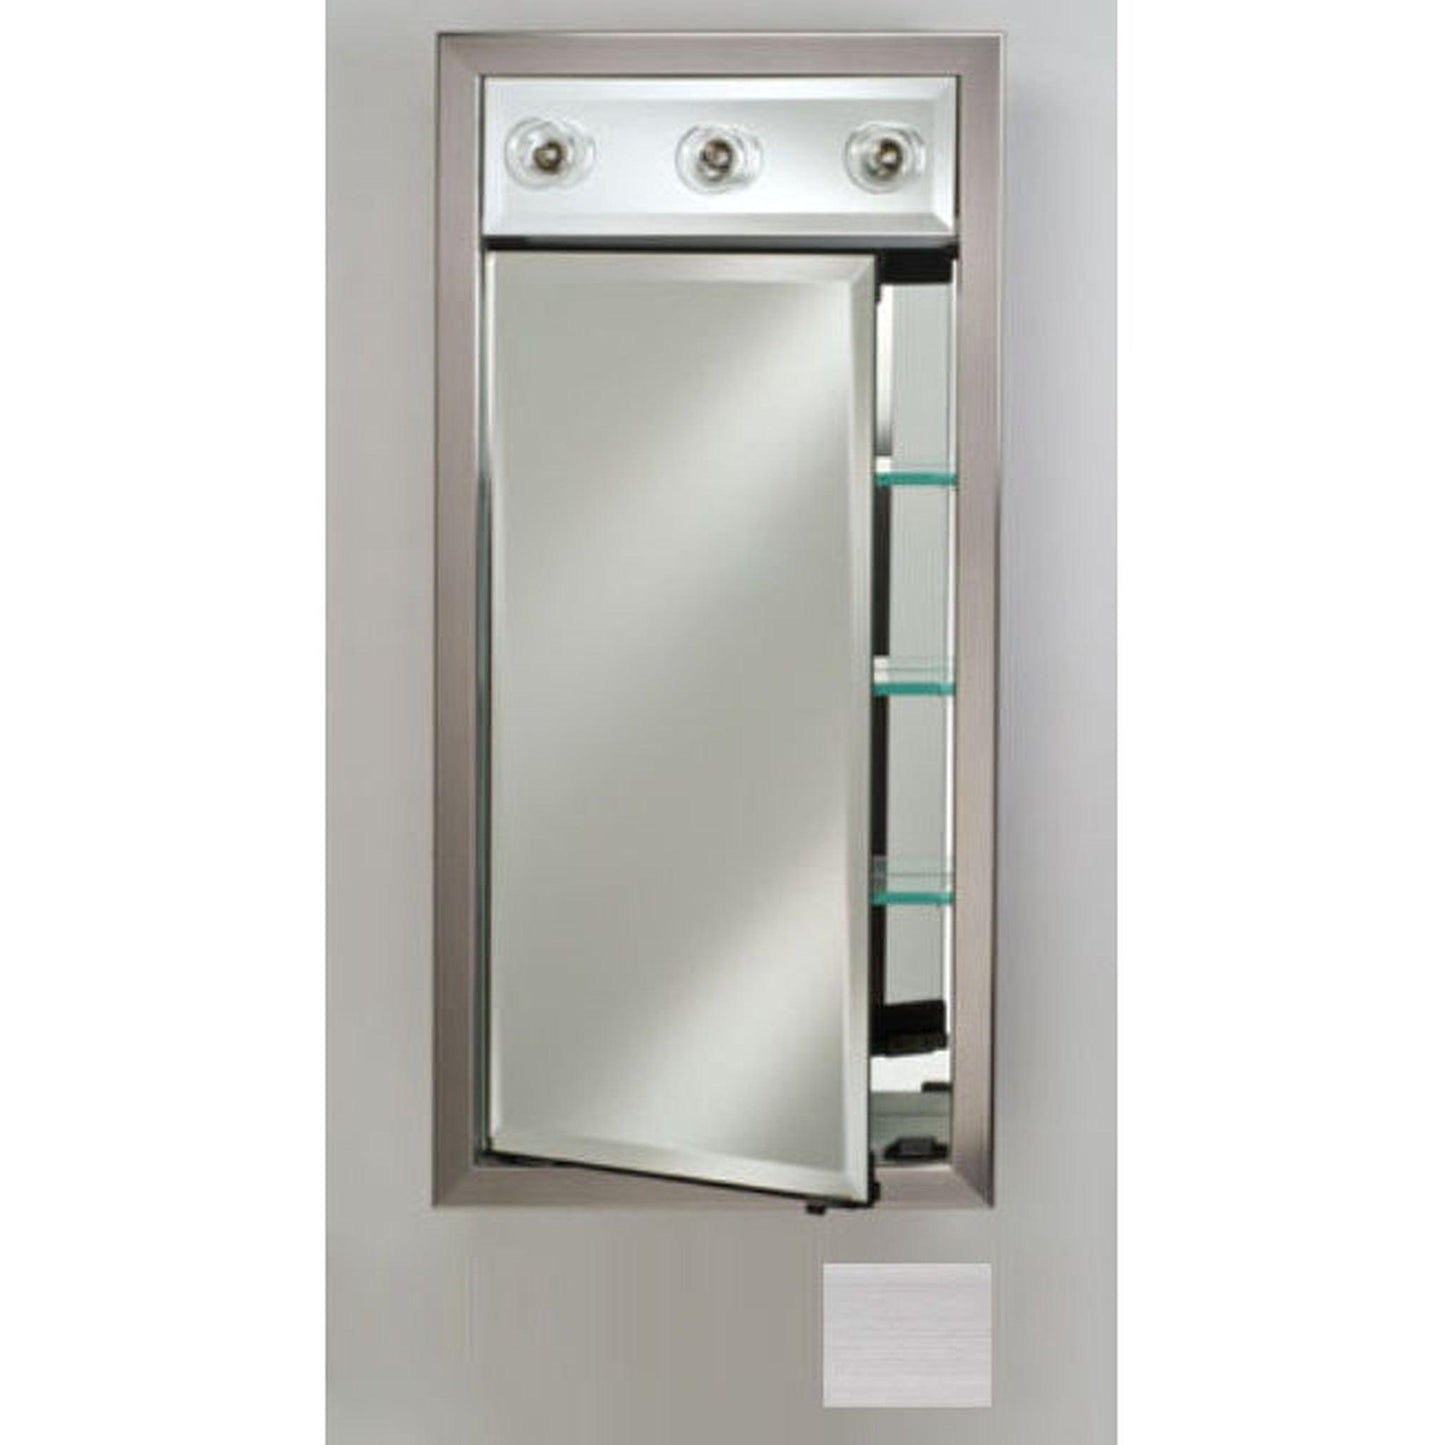 Afina Signature 17" x 40" Soho Stainless Recessed Right Hinged Single Door Medicine Cabinet With Contemporary Lights